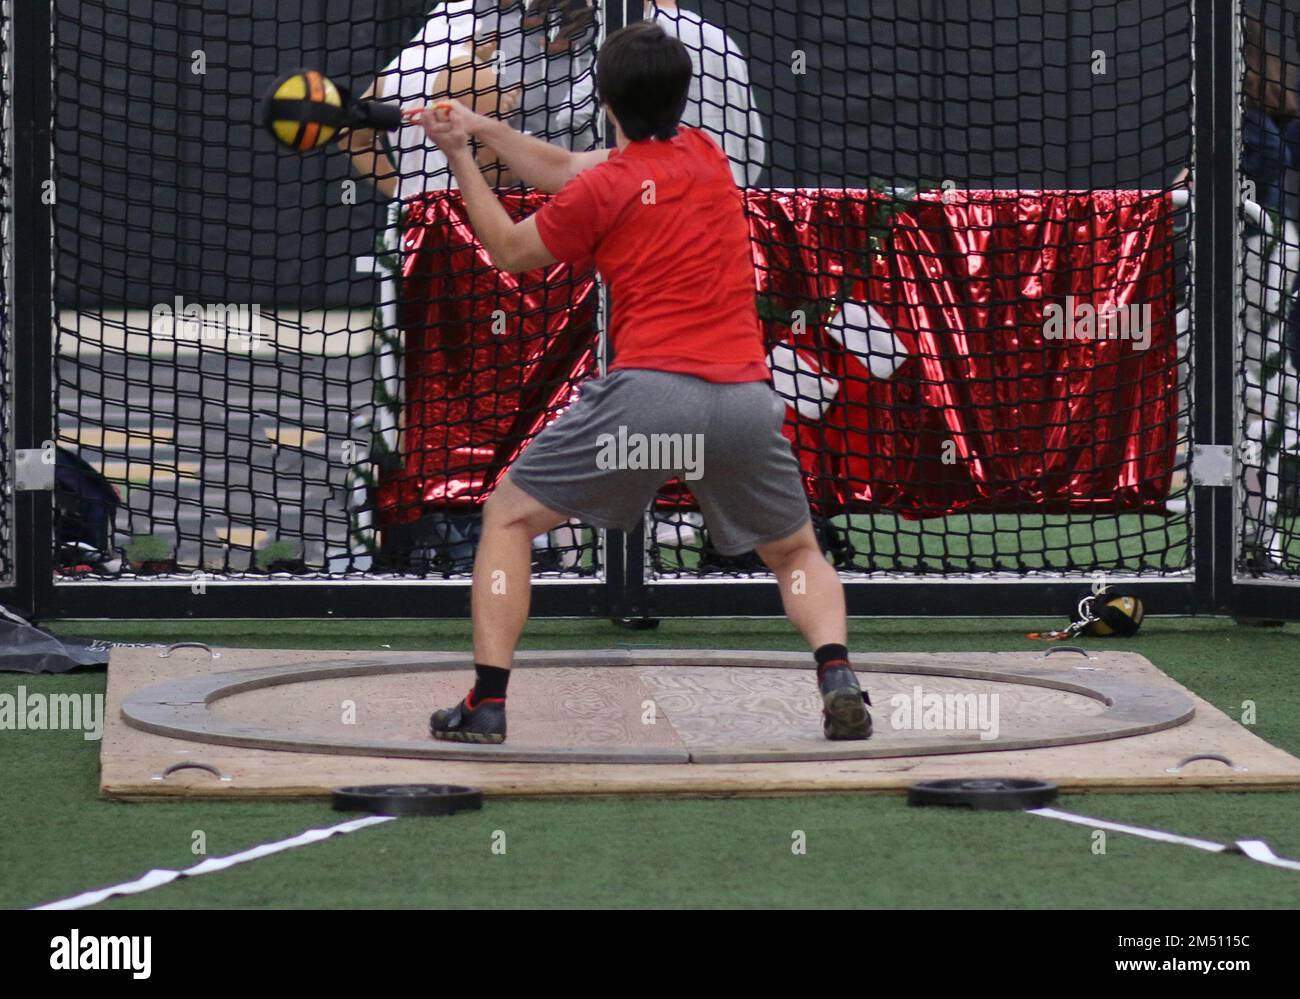 A high school boy throwing the weight indoor during a track and field weight throw competition. Stock Photo